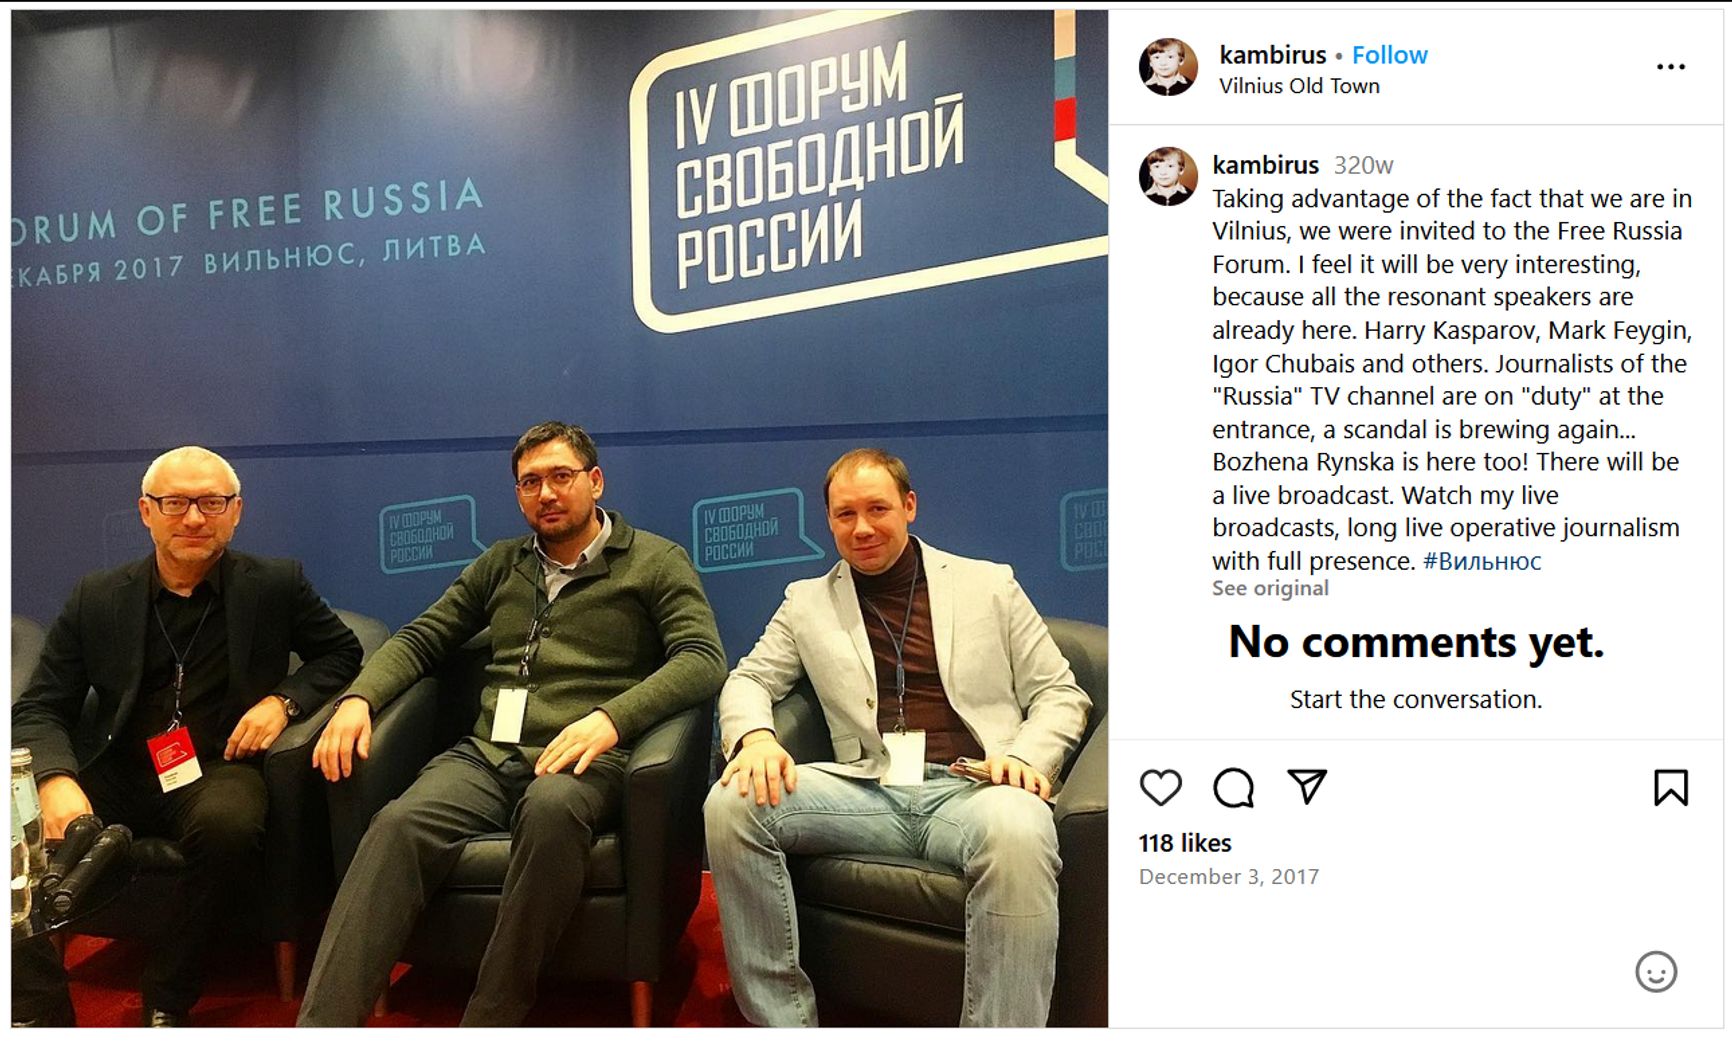 “Zhikharev” (right) in an Instagram photo with Ruslan Kambiev during the December 2017 Vilnius forum.